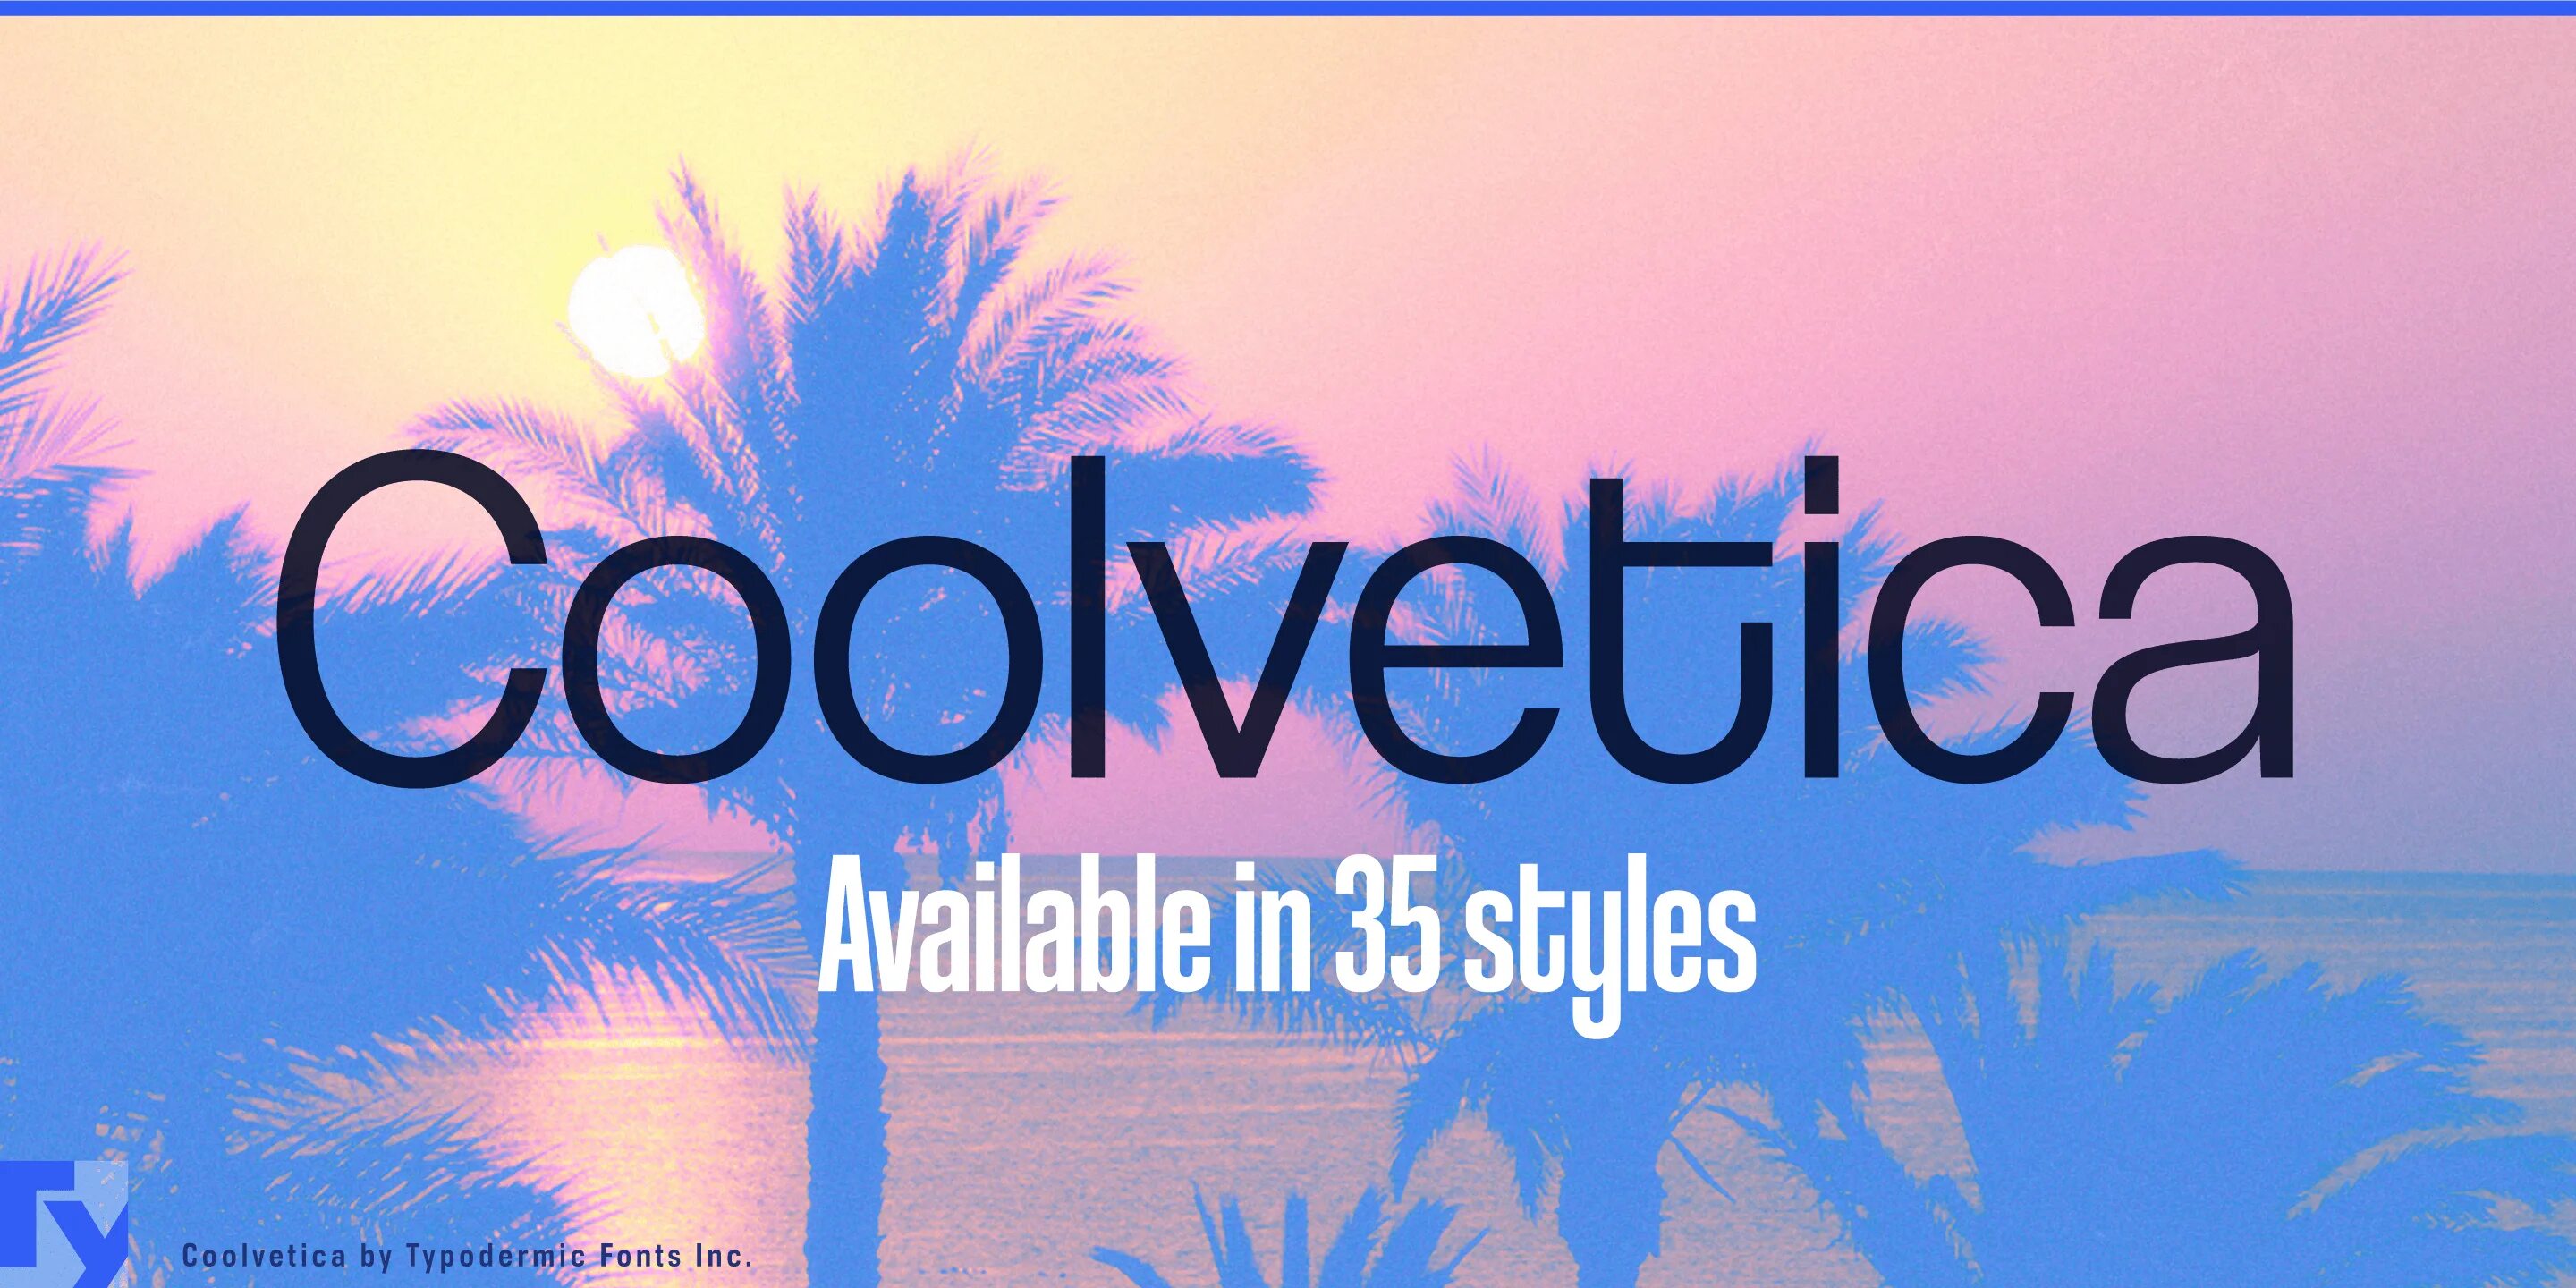 Coolvetica. Coolvetica font. Coolvetica кириллица. Coolvetica font download. Coolvetica rg шрифт